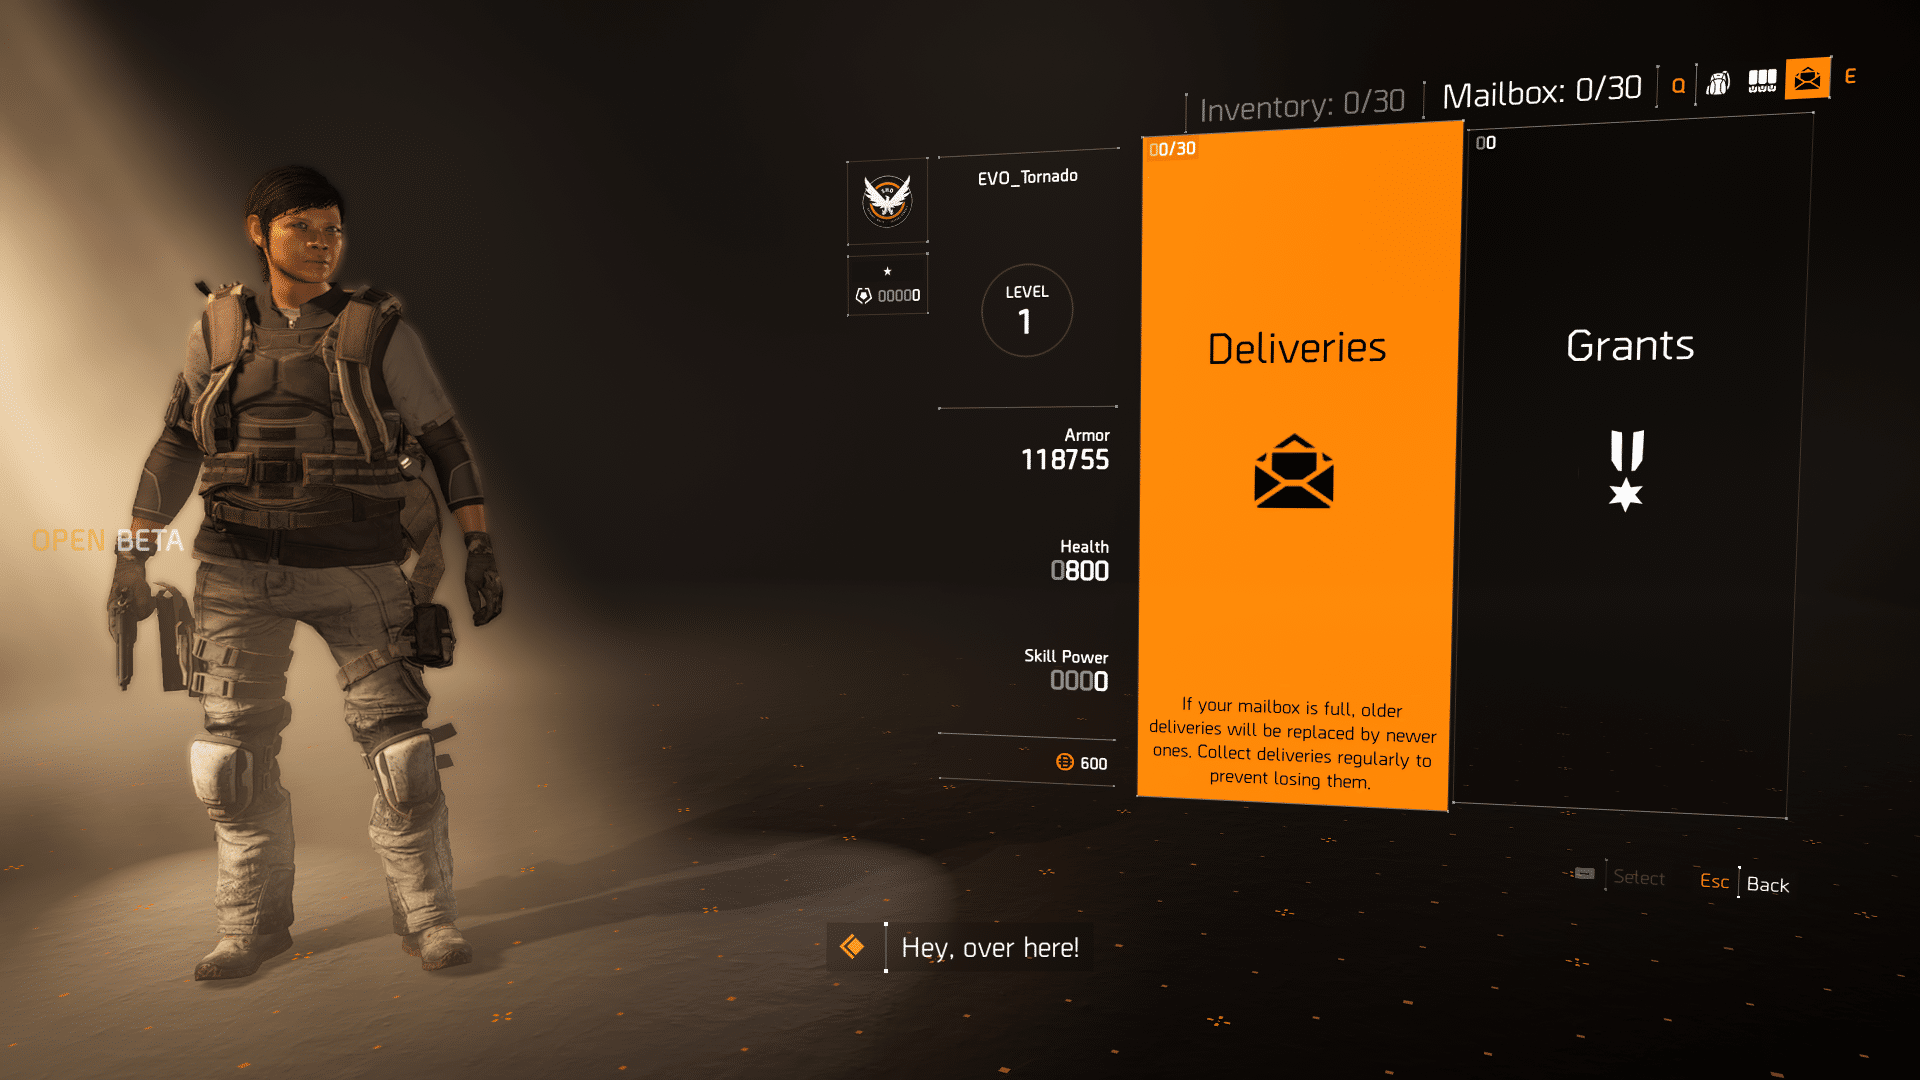 TheDivision2 3 3 2019 6 25 04 PM 677